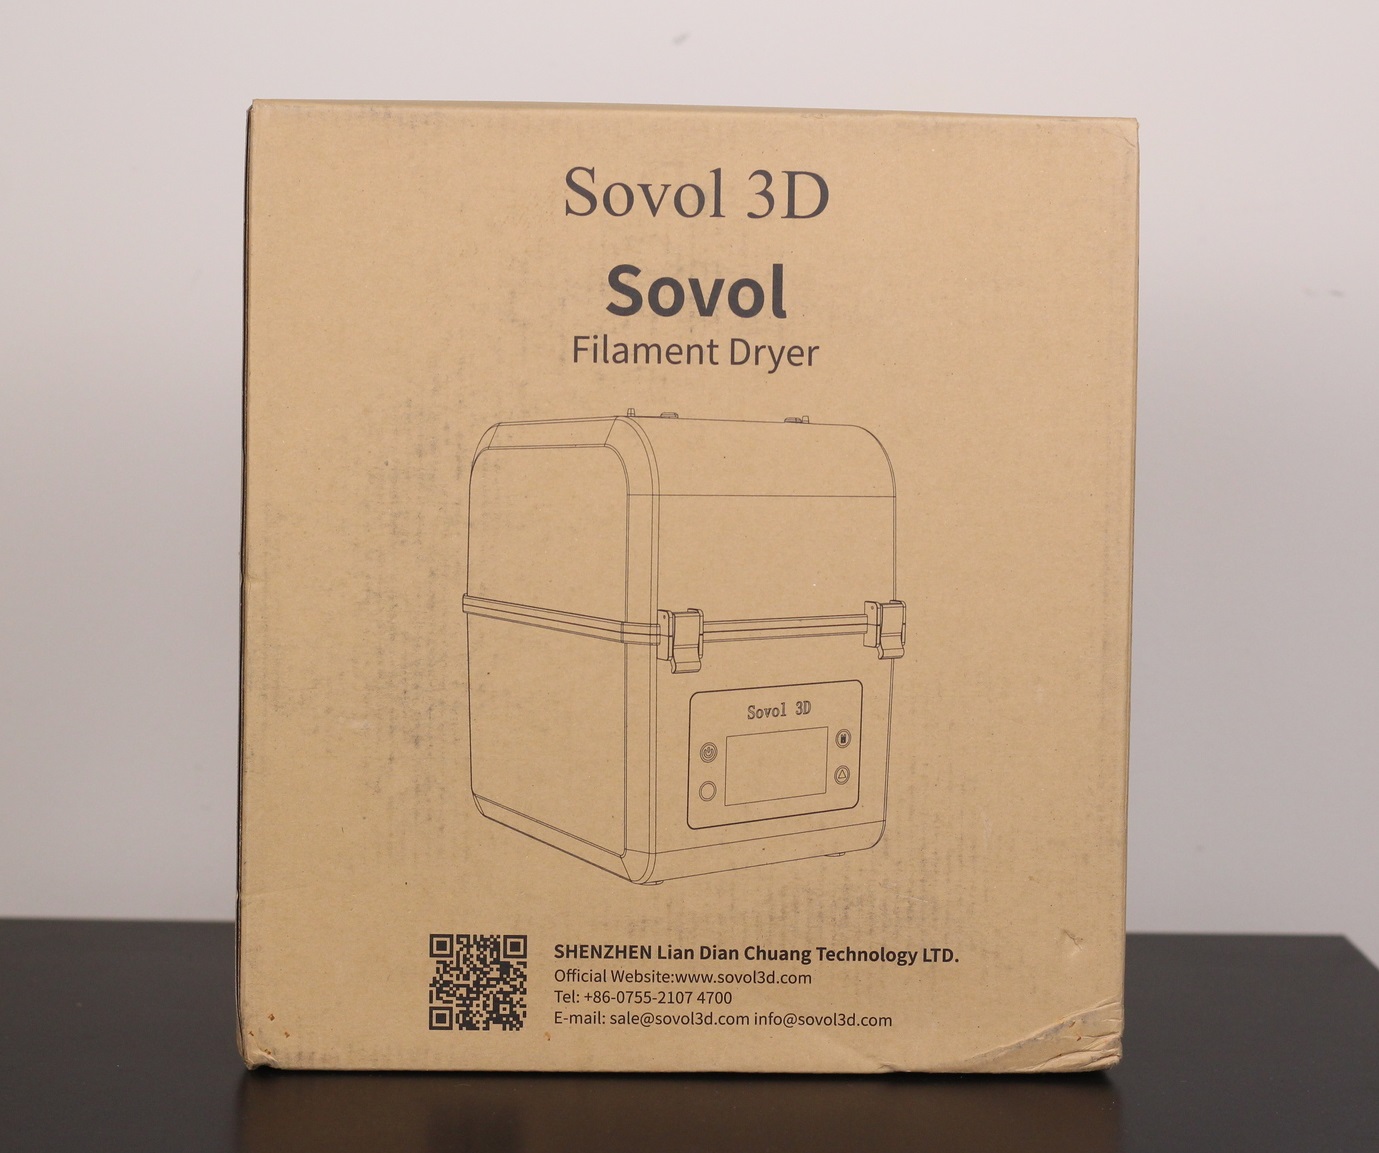 Sovol SH01 Filament Drier Packaging | Sovol Filament Dryer Review: Does it really work?